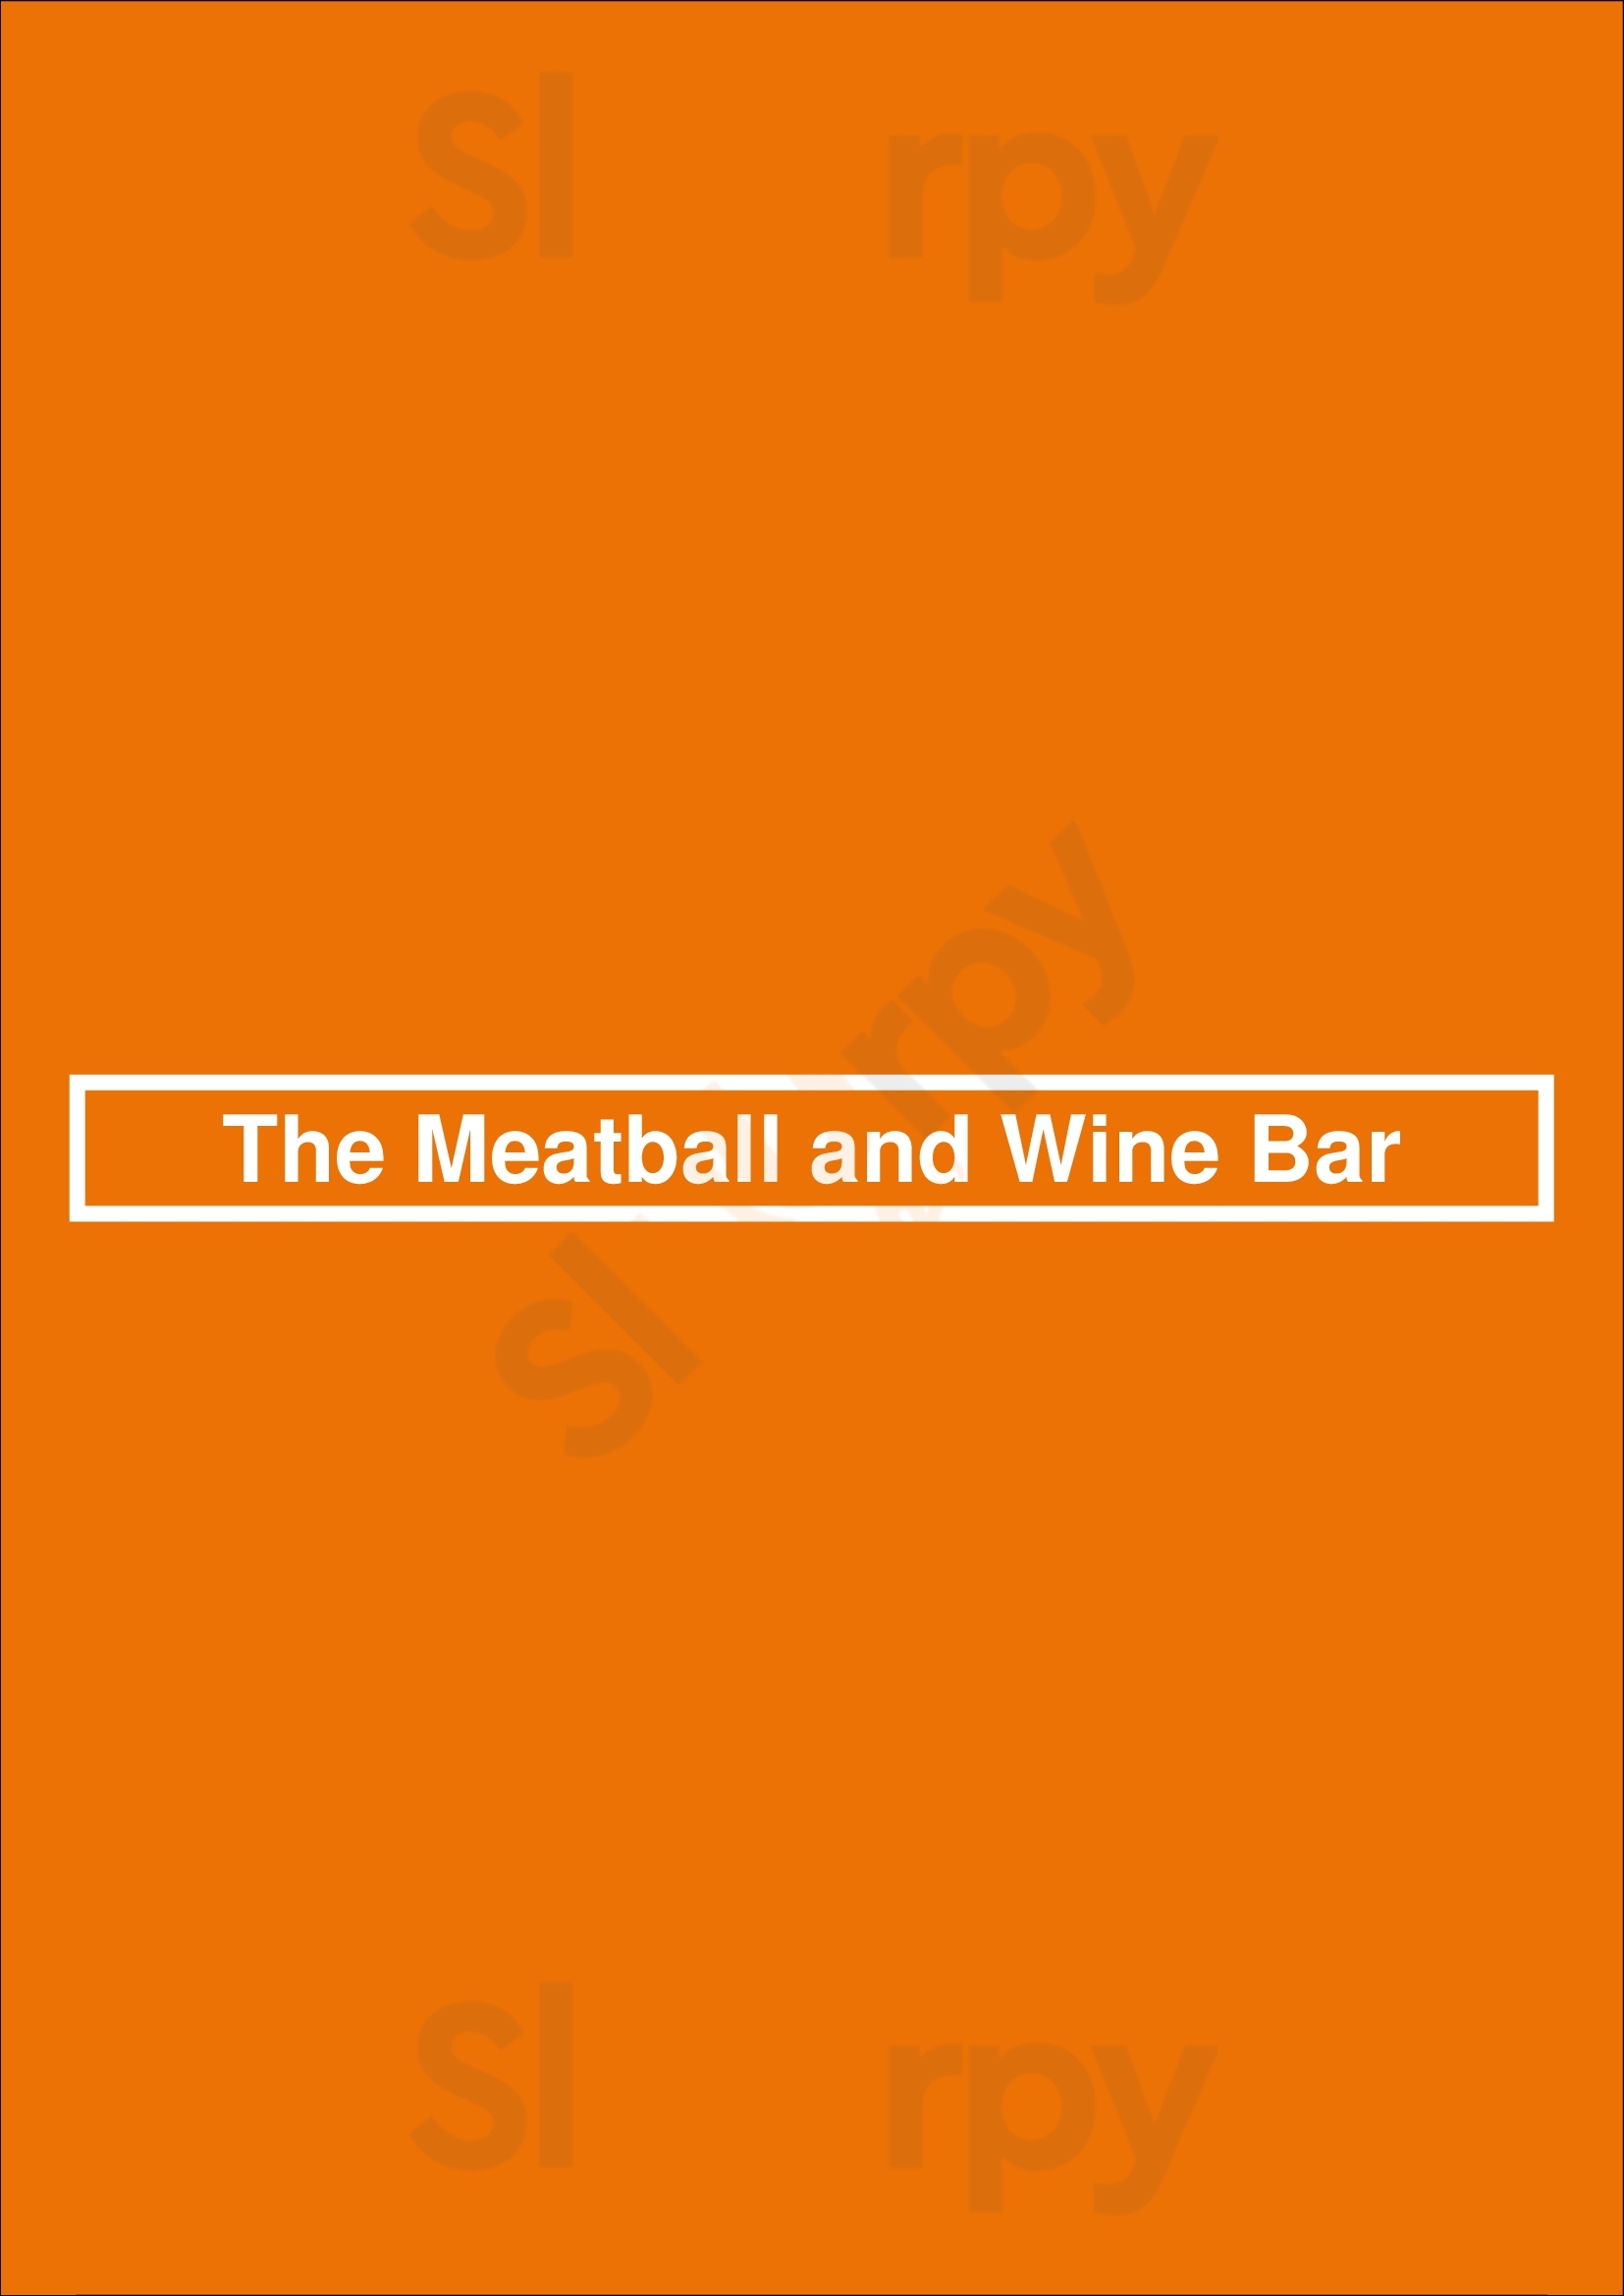 The Meatball And Wine Bar Melbourne Menu - 1